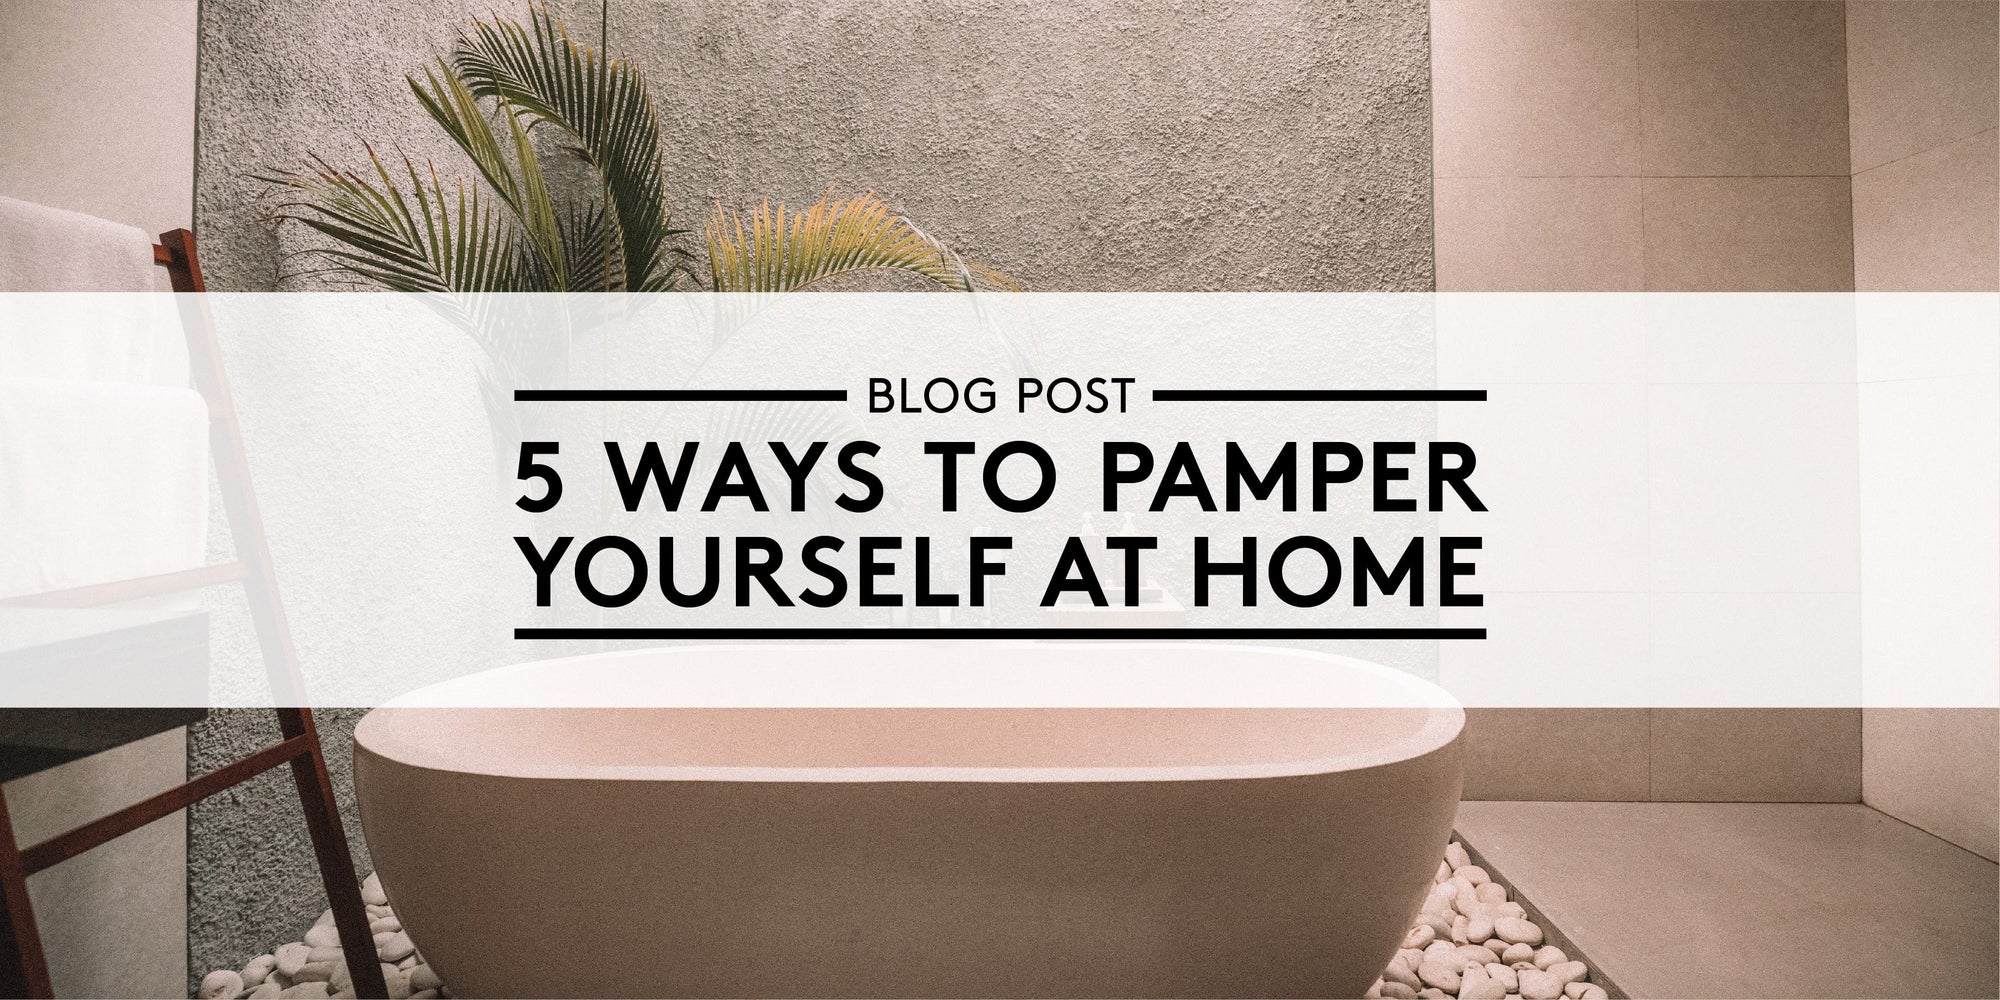 5 Ways to Pamper Yourself at Home